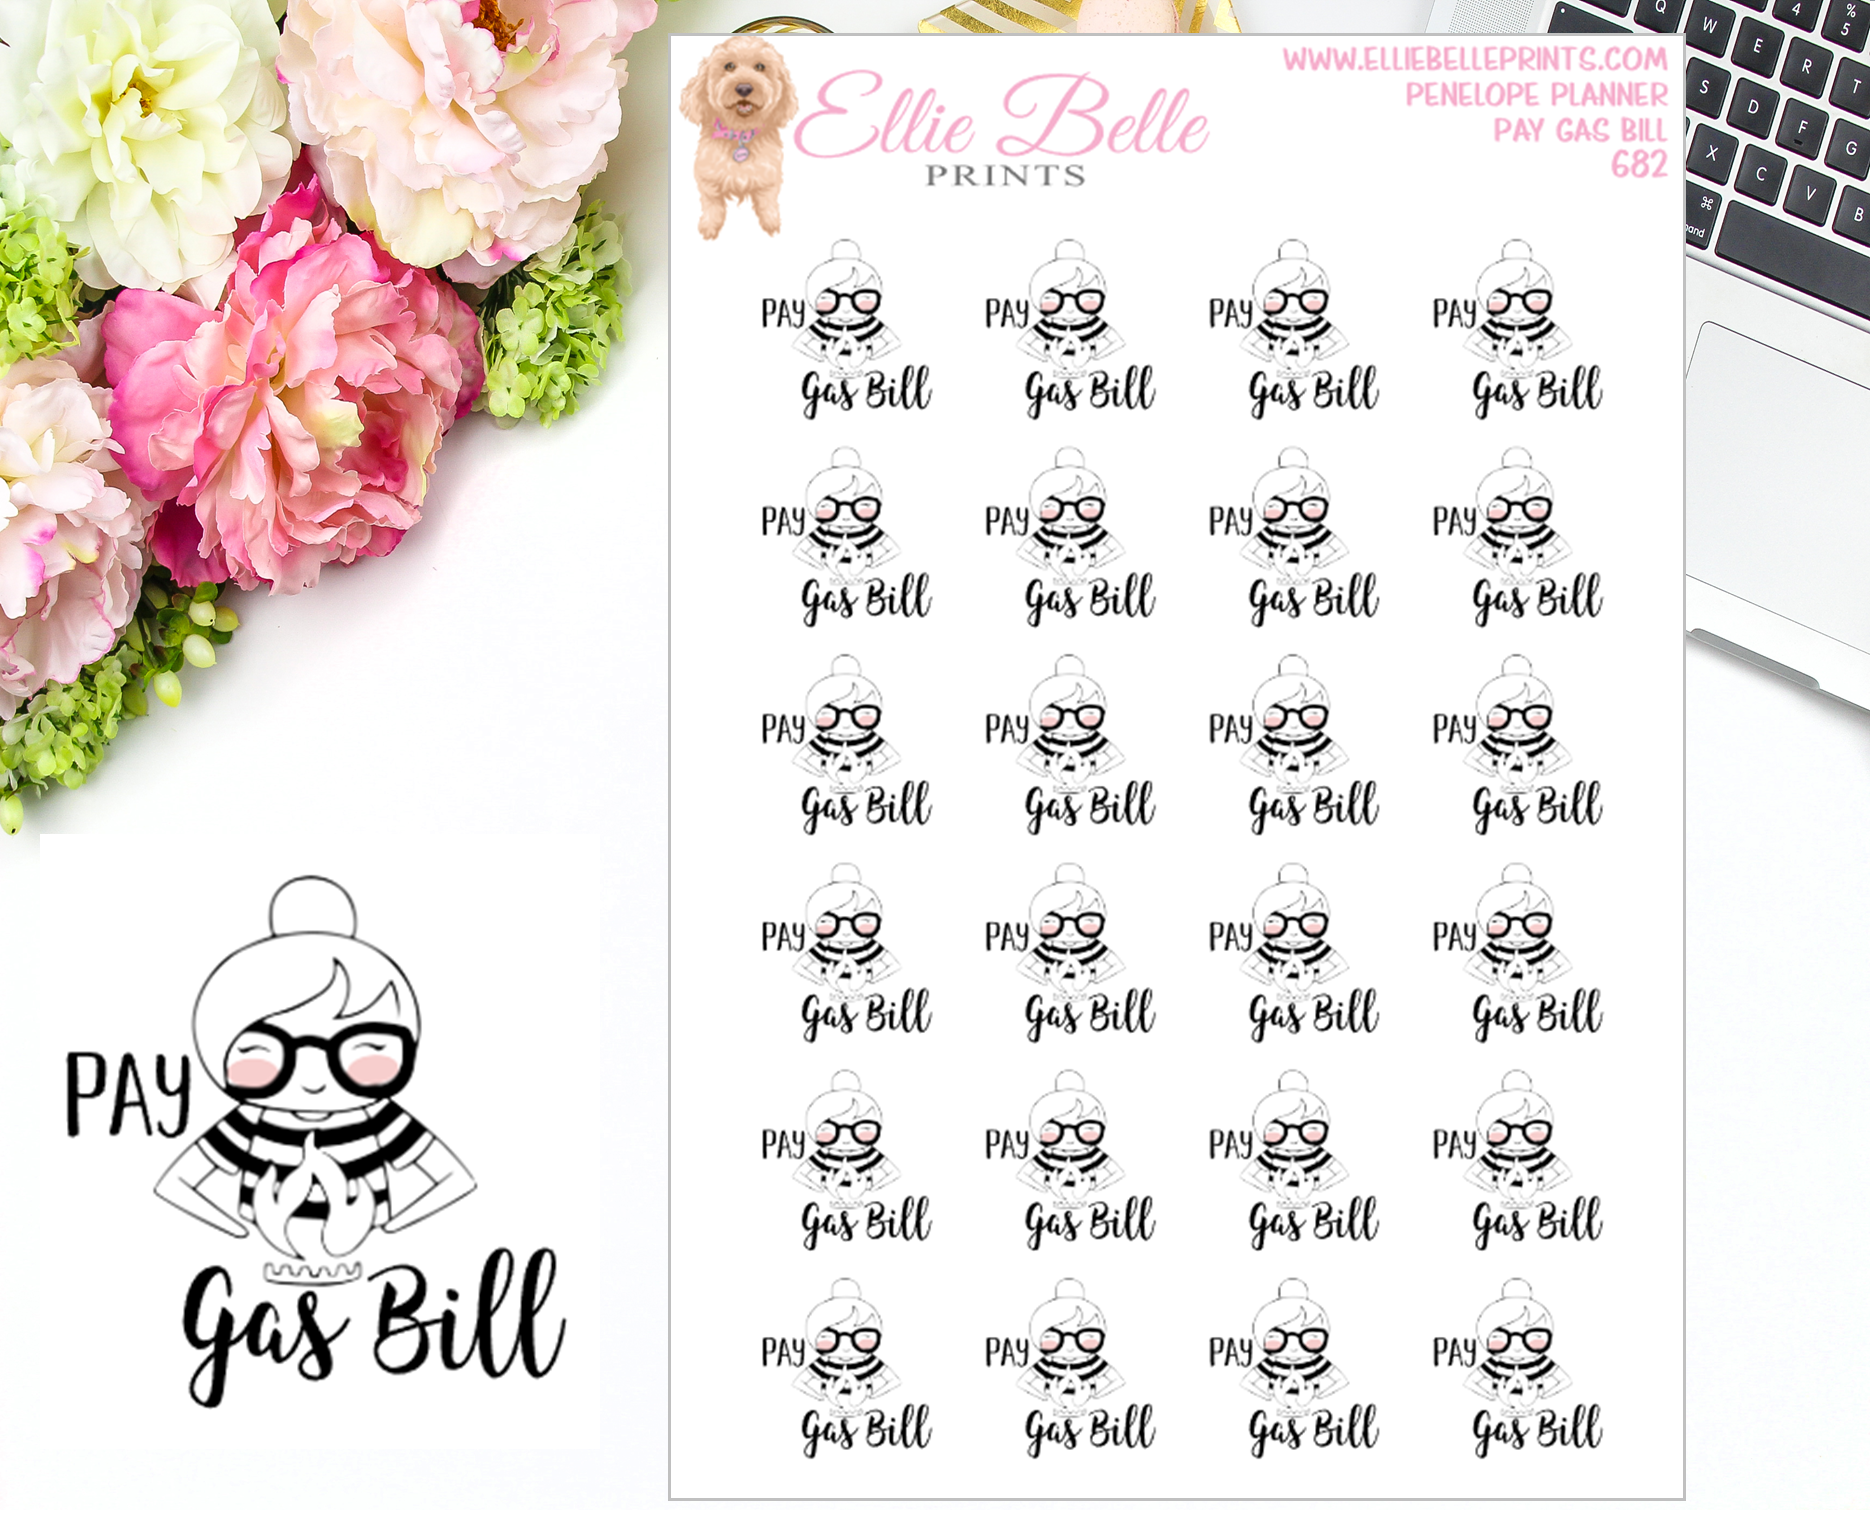 Pay Gas Bill Stickers - Penelope Planner